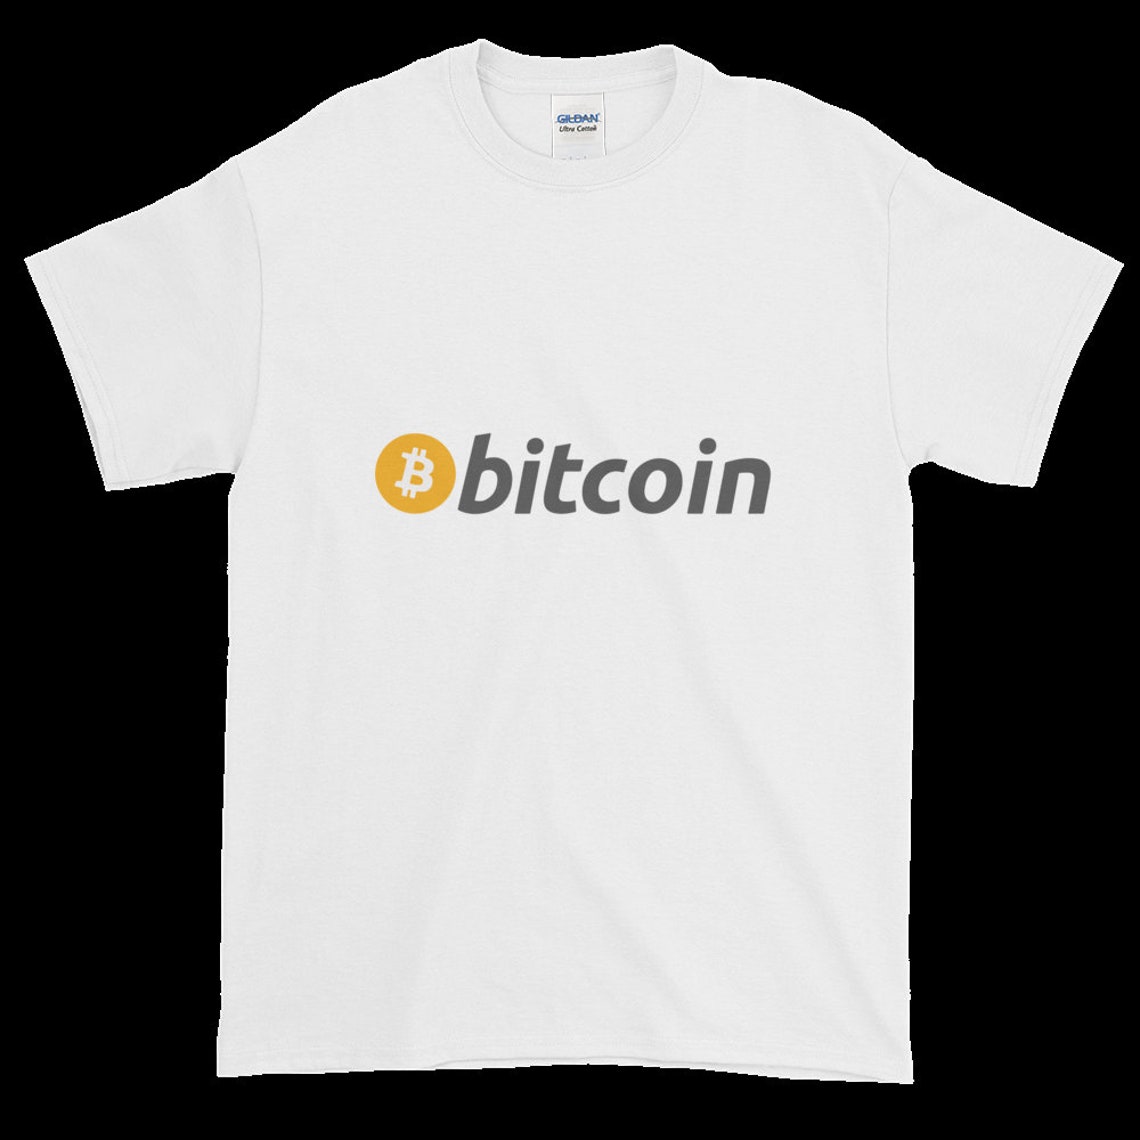 can i buy clothes with bitcoin